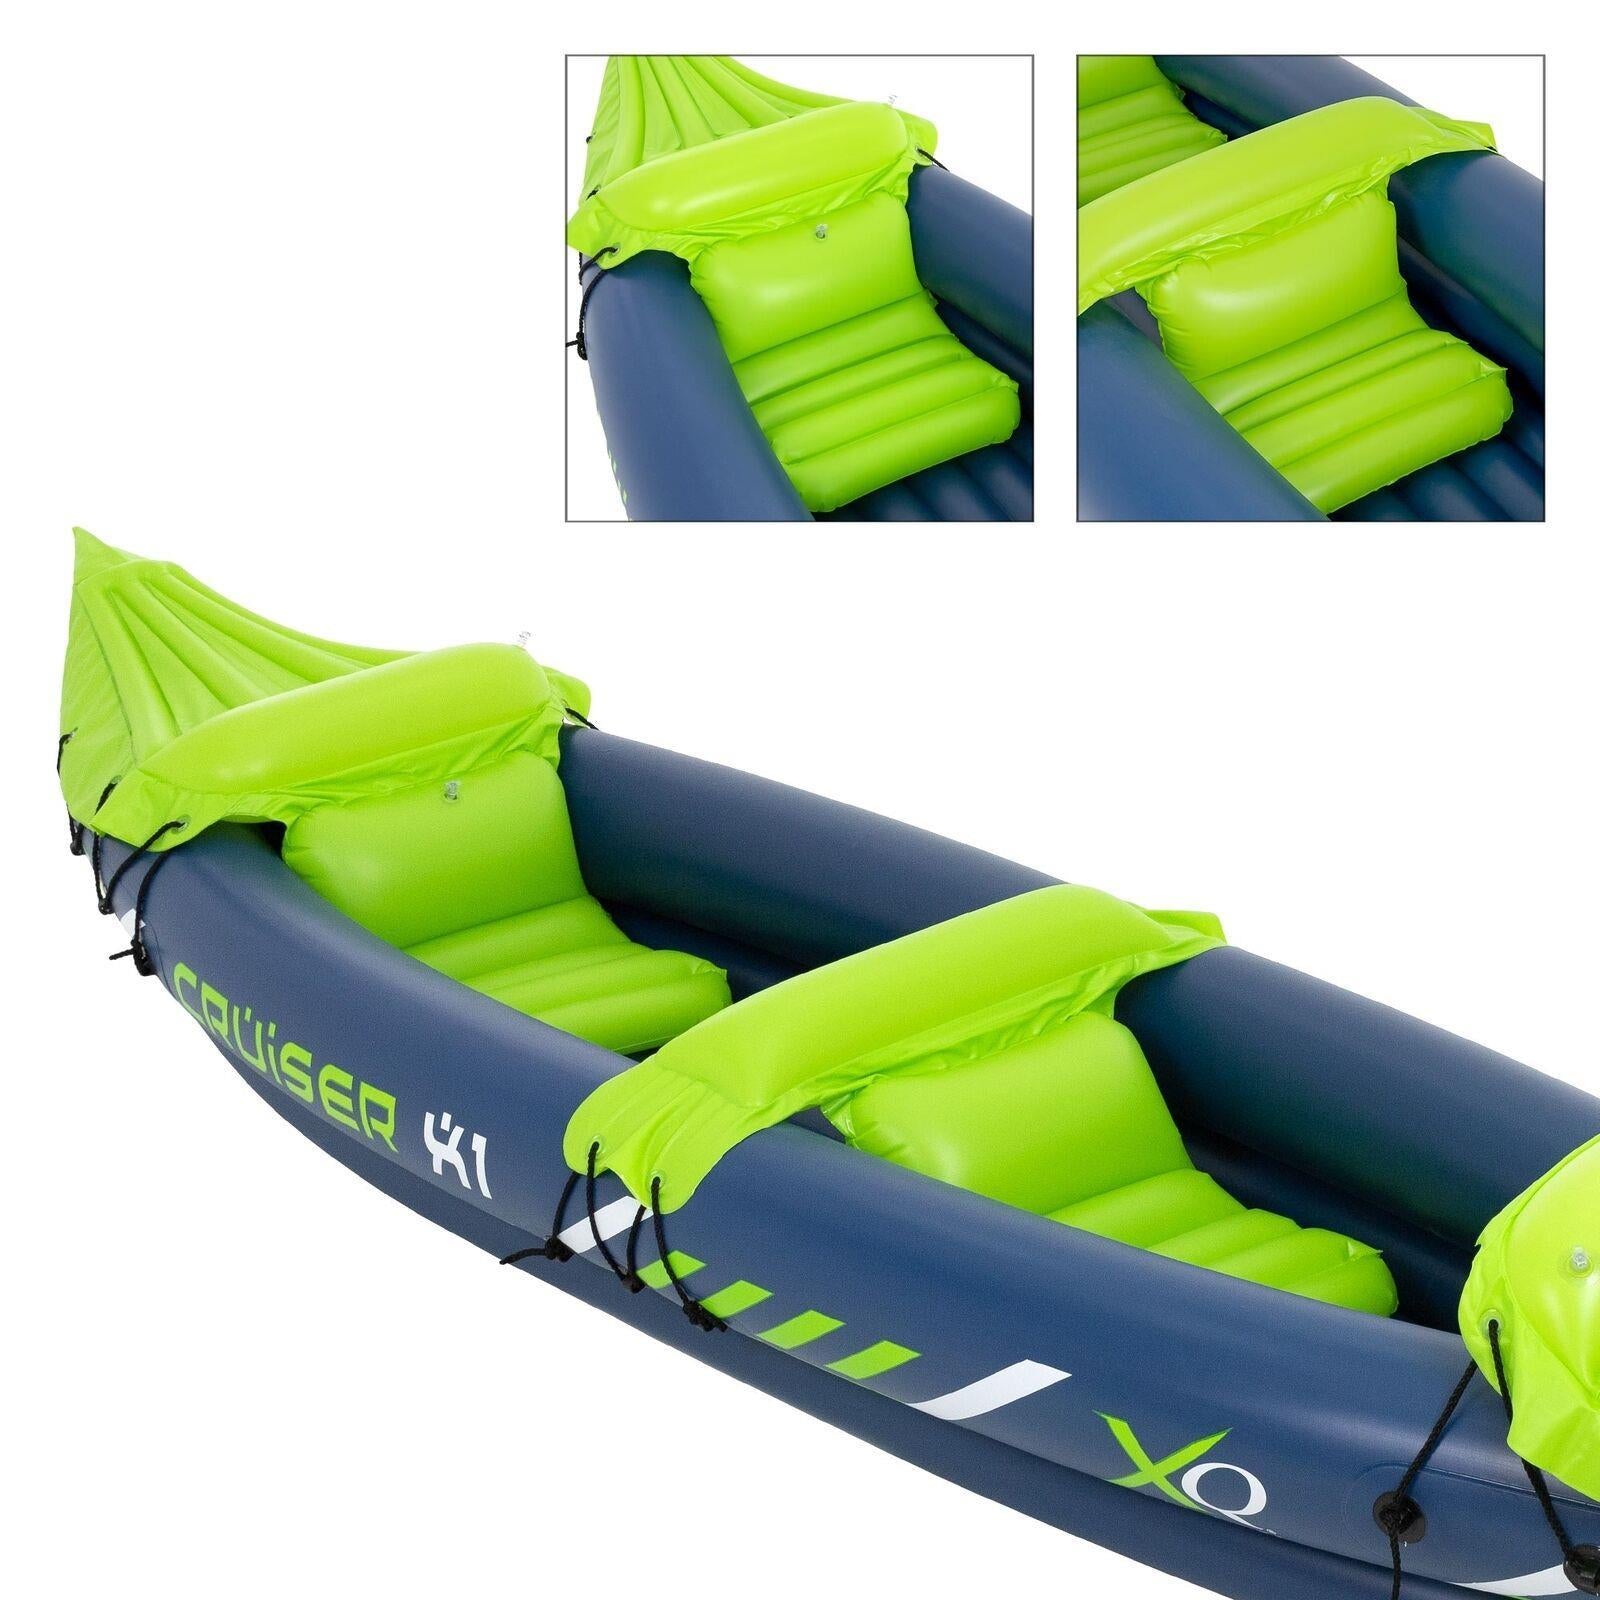 GEEZY 2 Man Person Inflatable Canoe Kayak Dinghy Boat with Double Paddle by GEEZY - The Magic Toy Shop